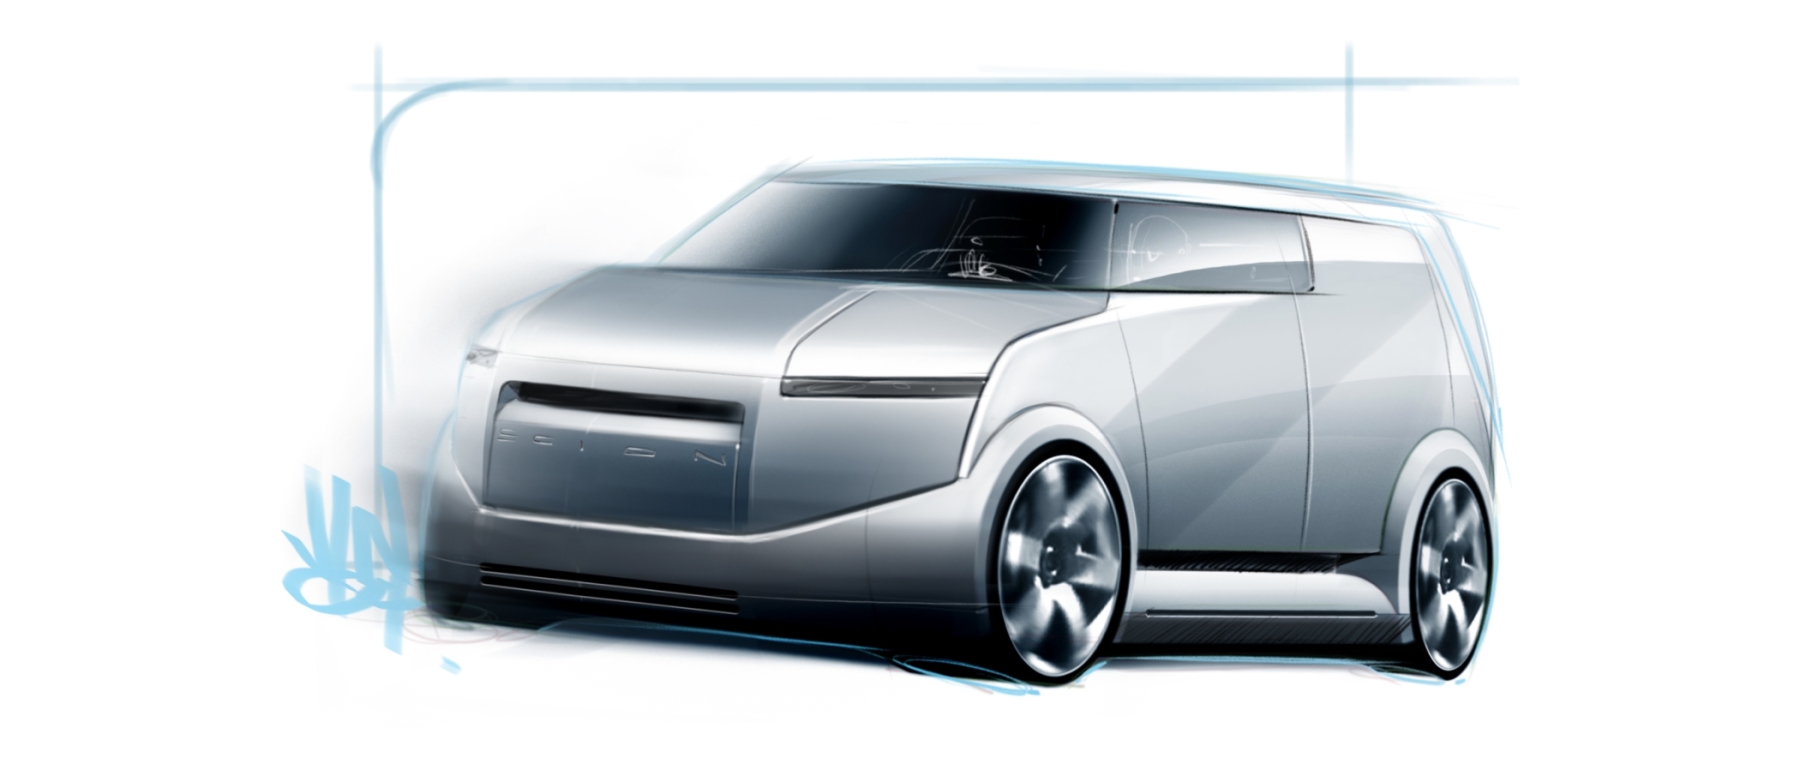 Scion t2b concept (unveiled at the New York International Auto Show in 2005)